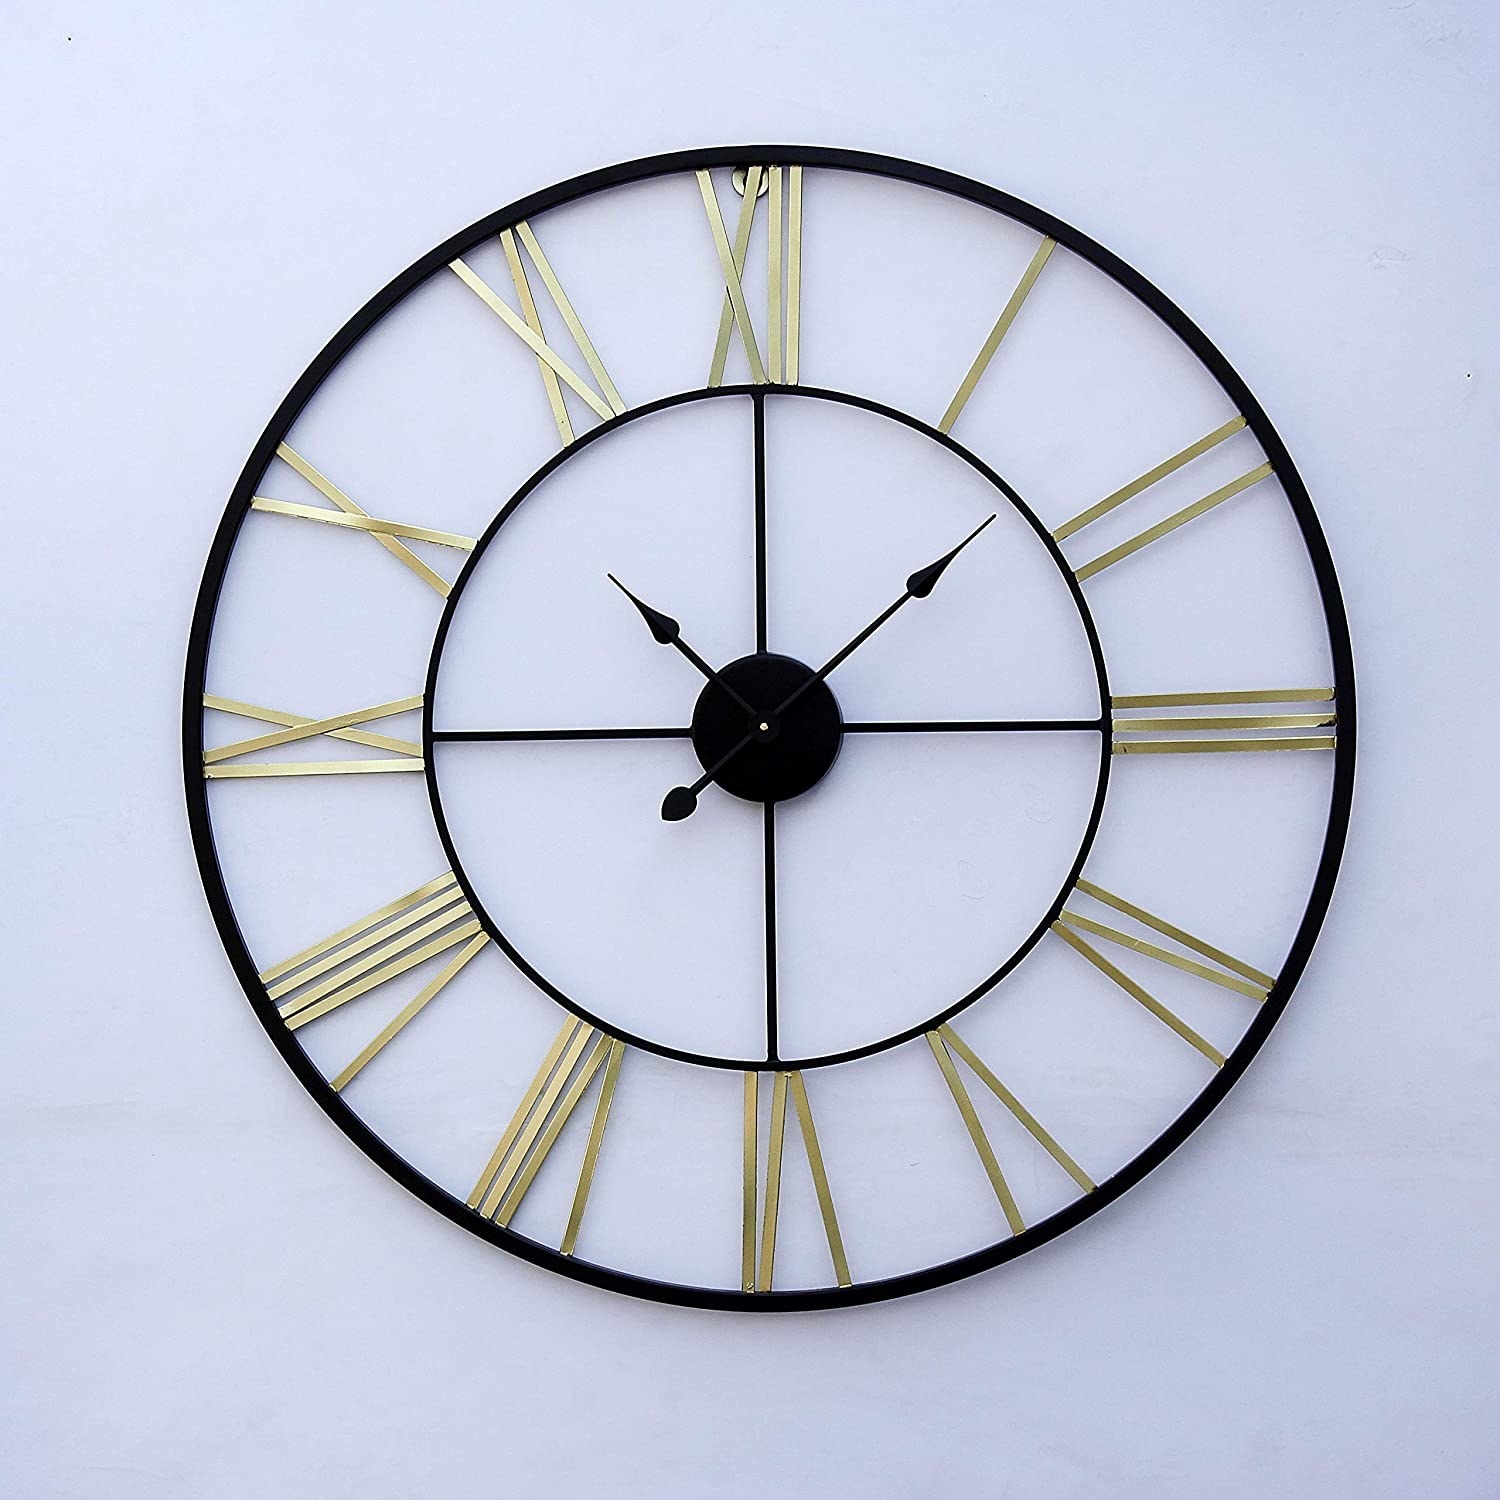 A clock with a black hands and rim, and golden Roman numerals